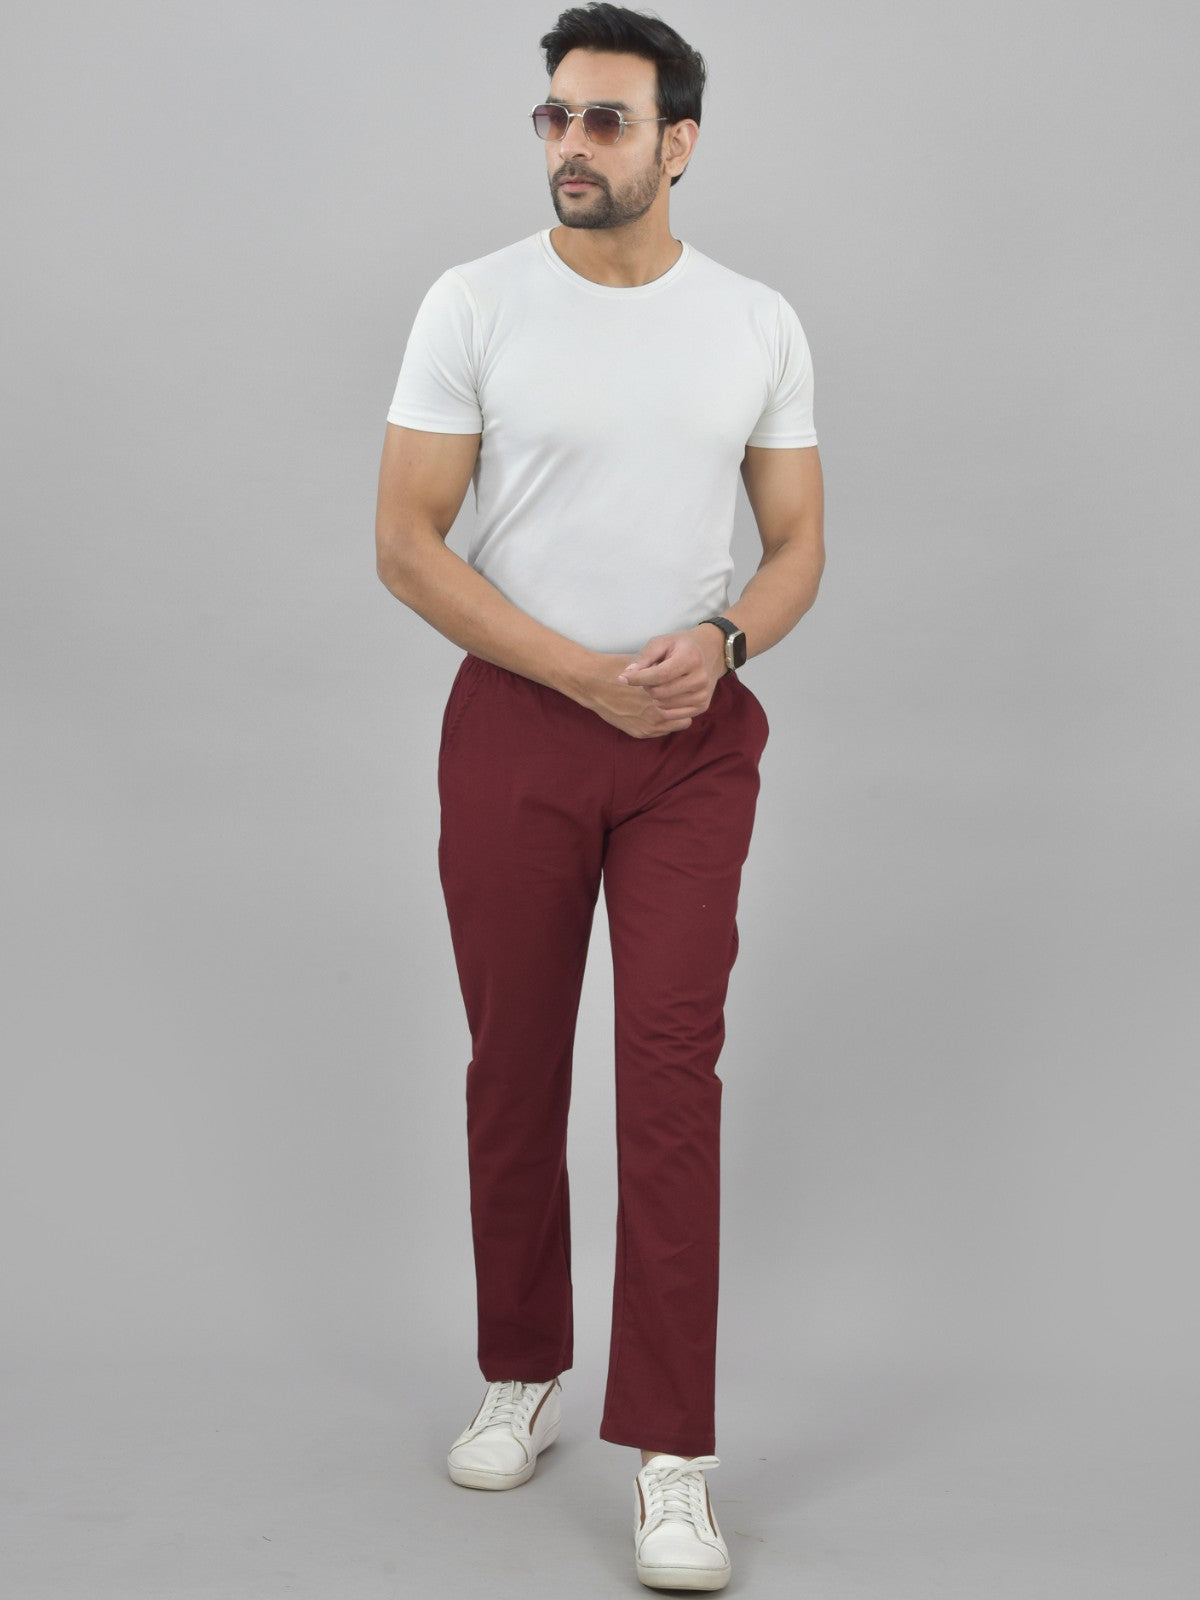 Pack Of 2 Brown And Wine Airy Linen Summer Cool Cotton Comfort Pants For Men